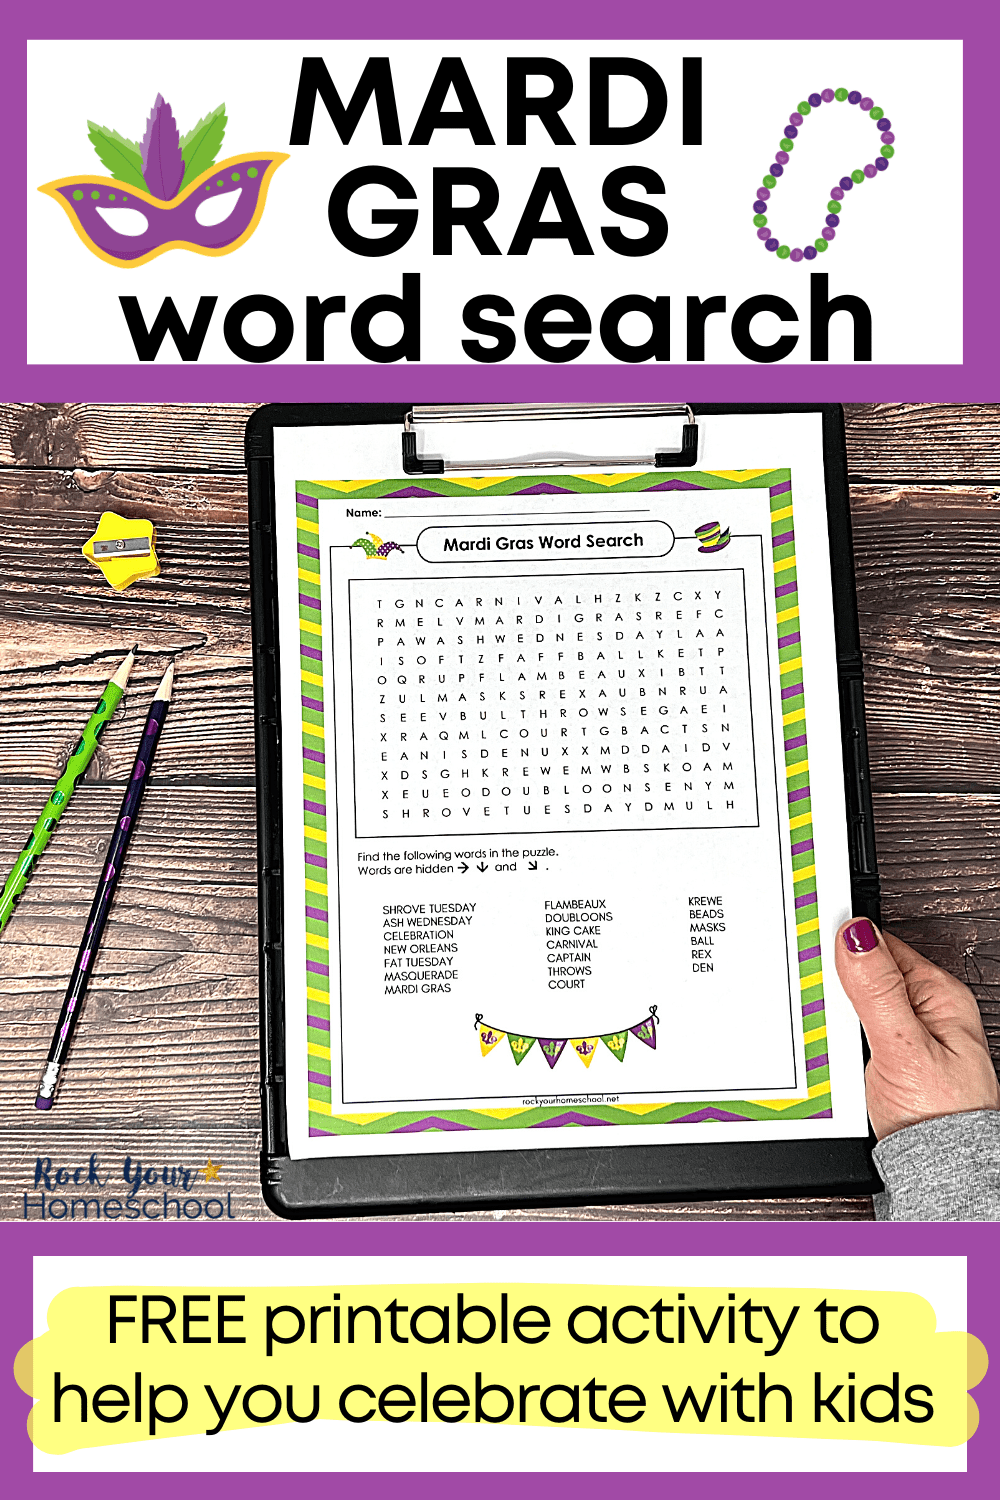 Mardi Gras Word Search: Simple Activity for Extra Holiday Fun (Free)